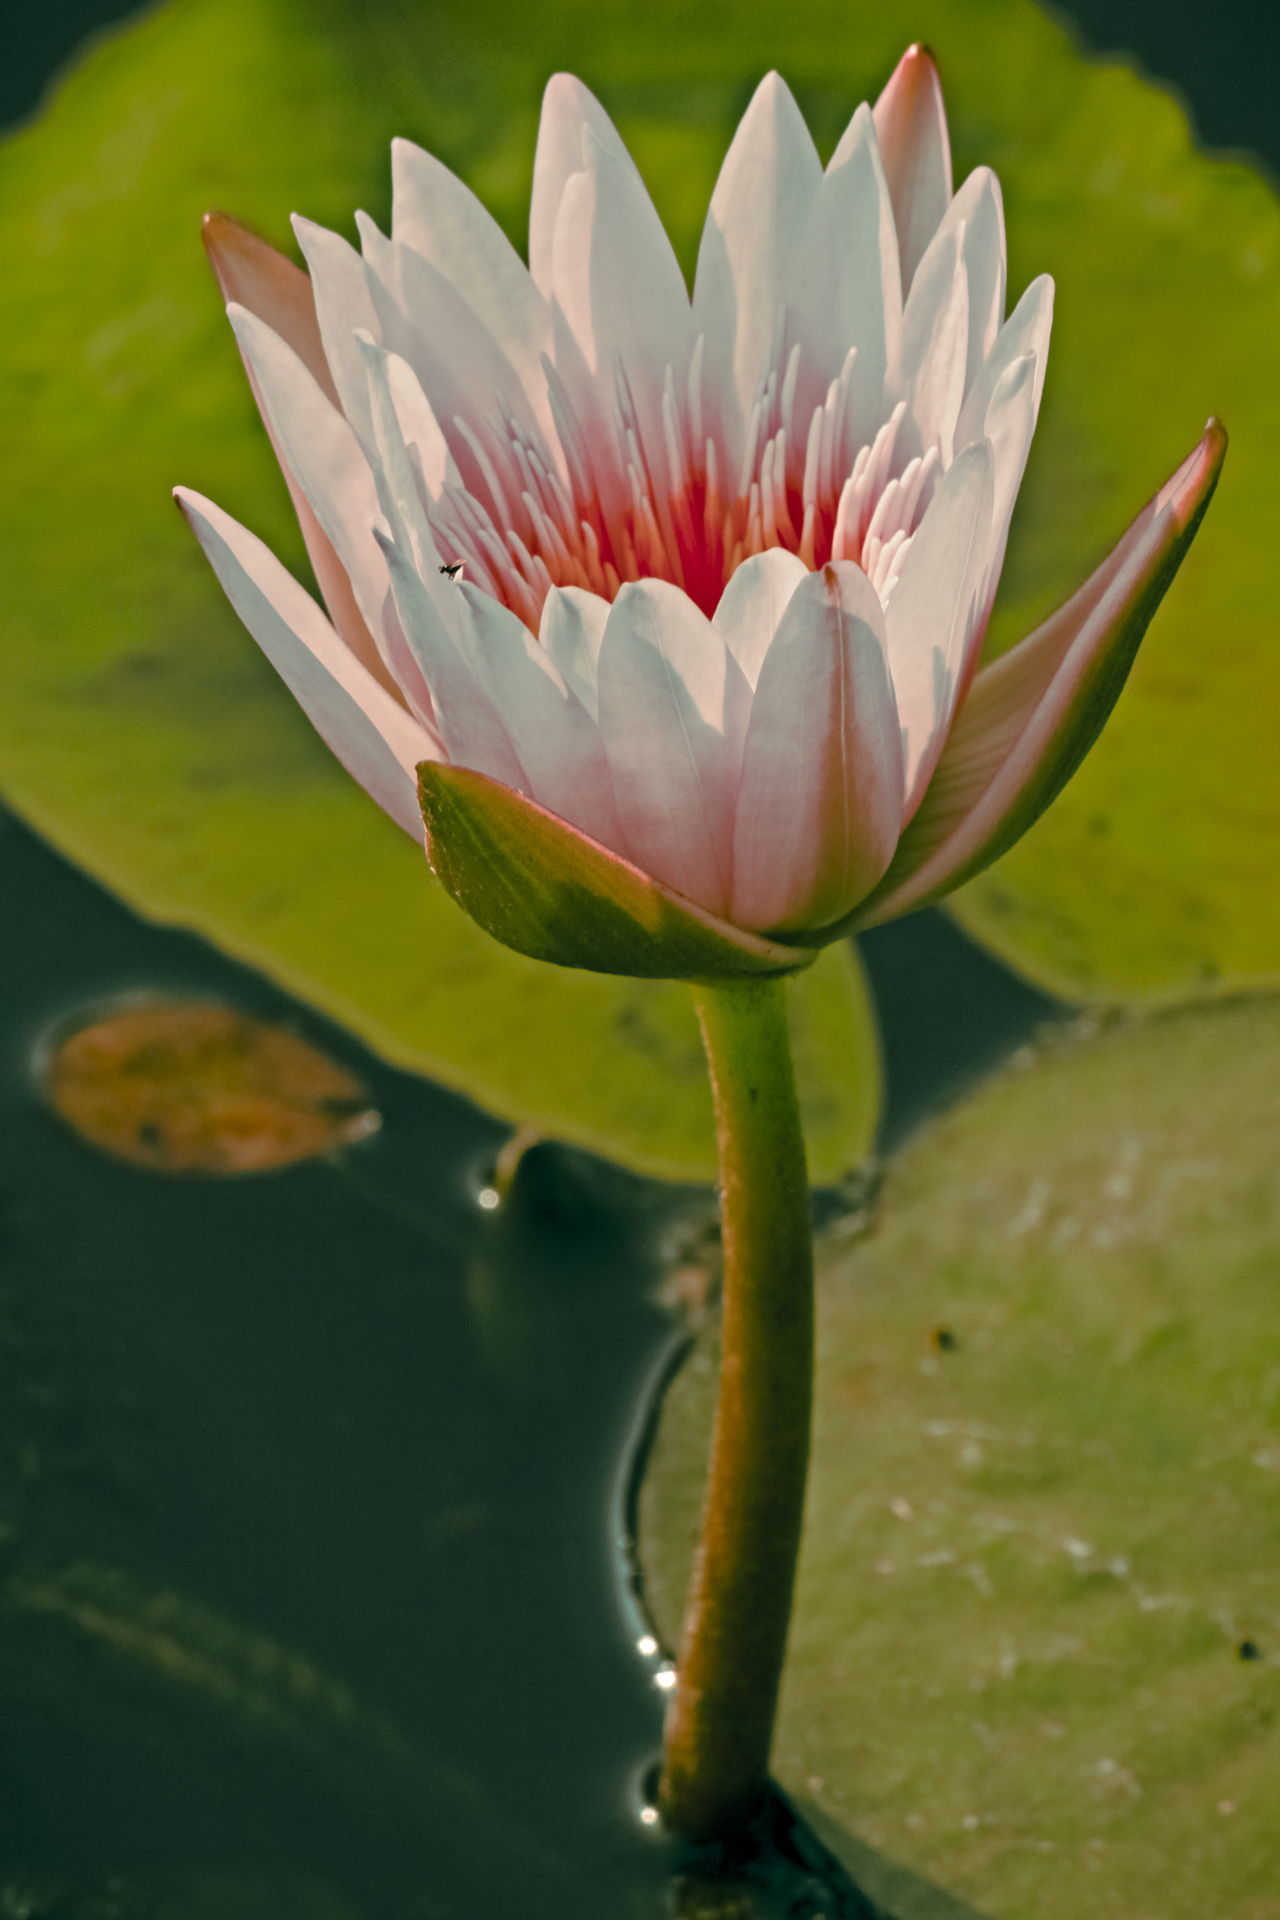 Meanings Unveiled - What Does a Water Lily Really Symbolize?